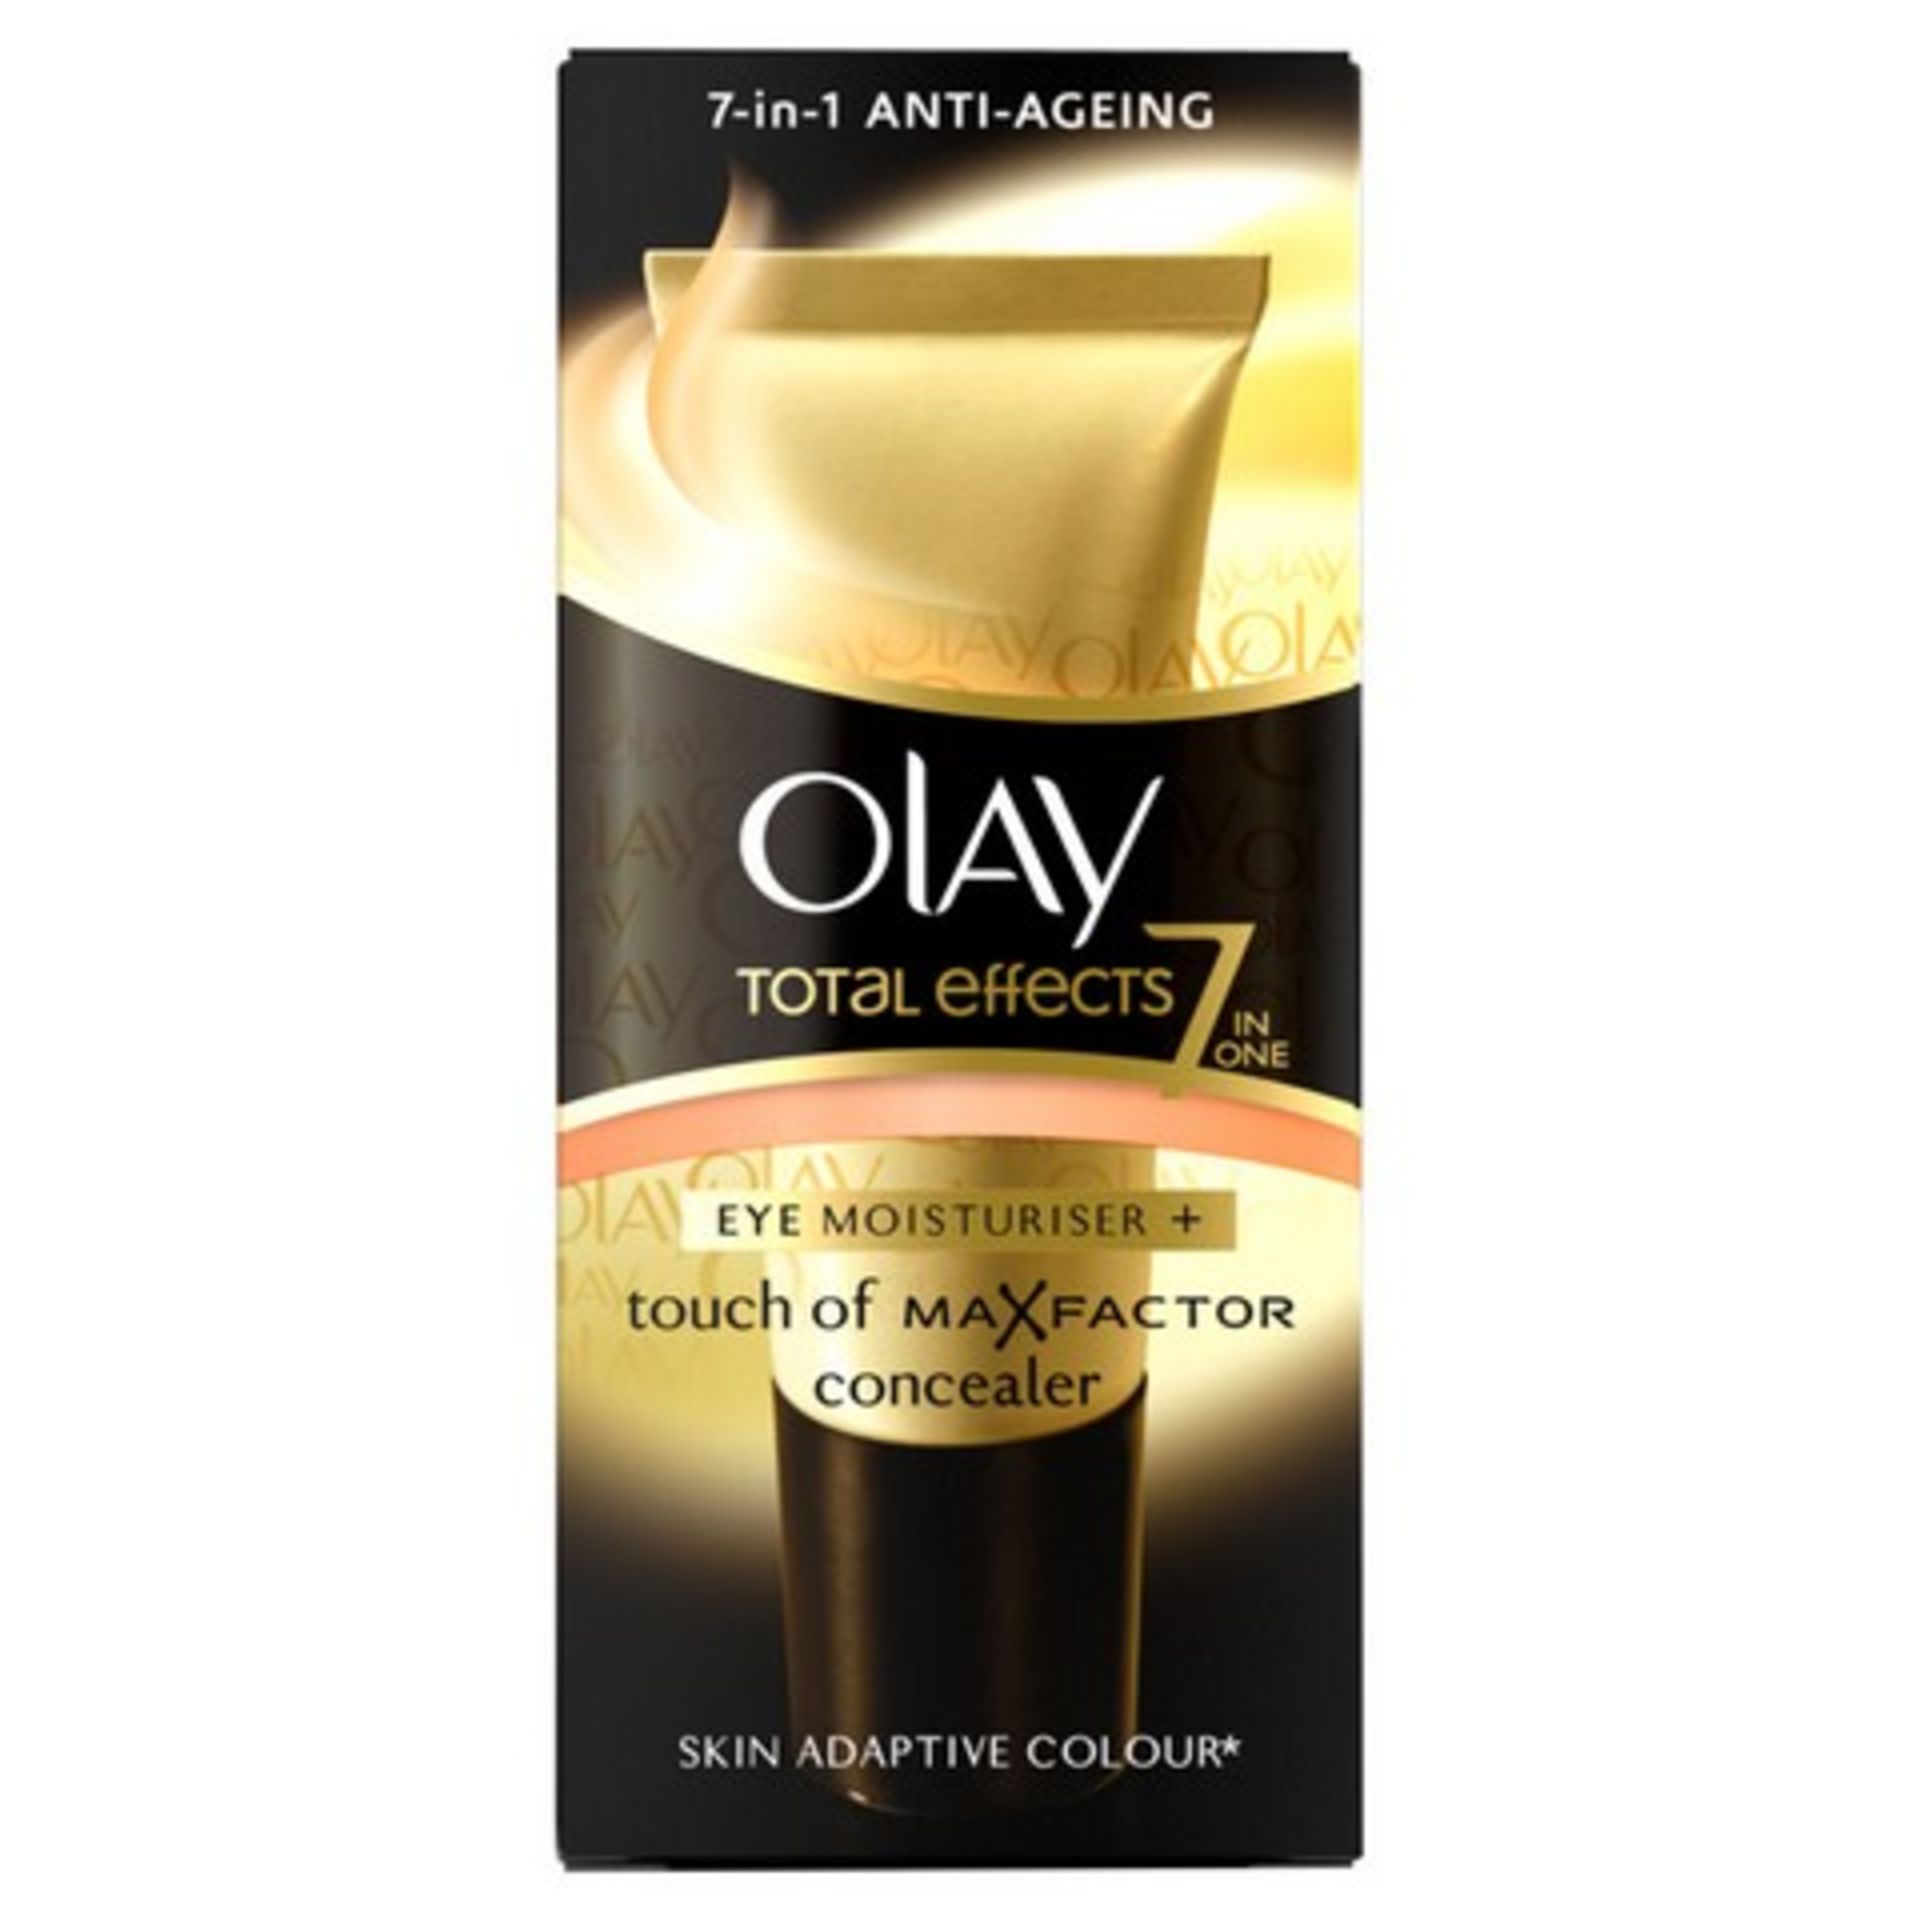 V Brand New Olay Total Effects 7-In-1 Eye Moisturiser + Touch Of MaXfactor Concealer Skin Adaptive